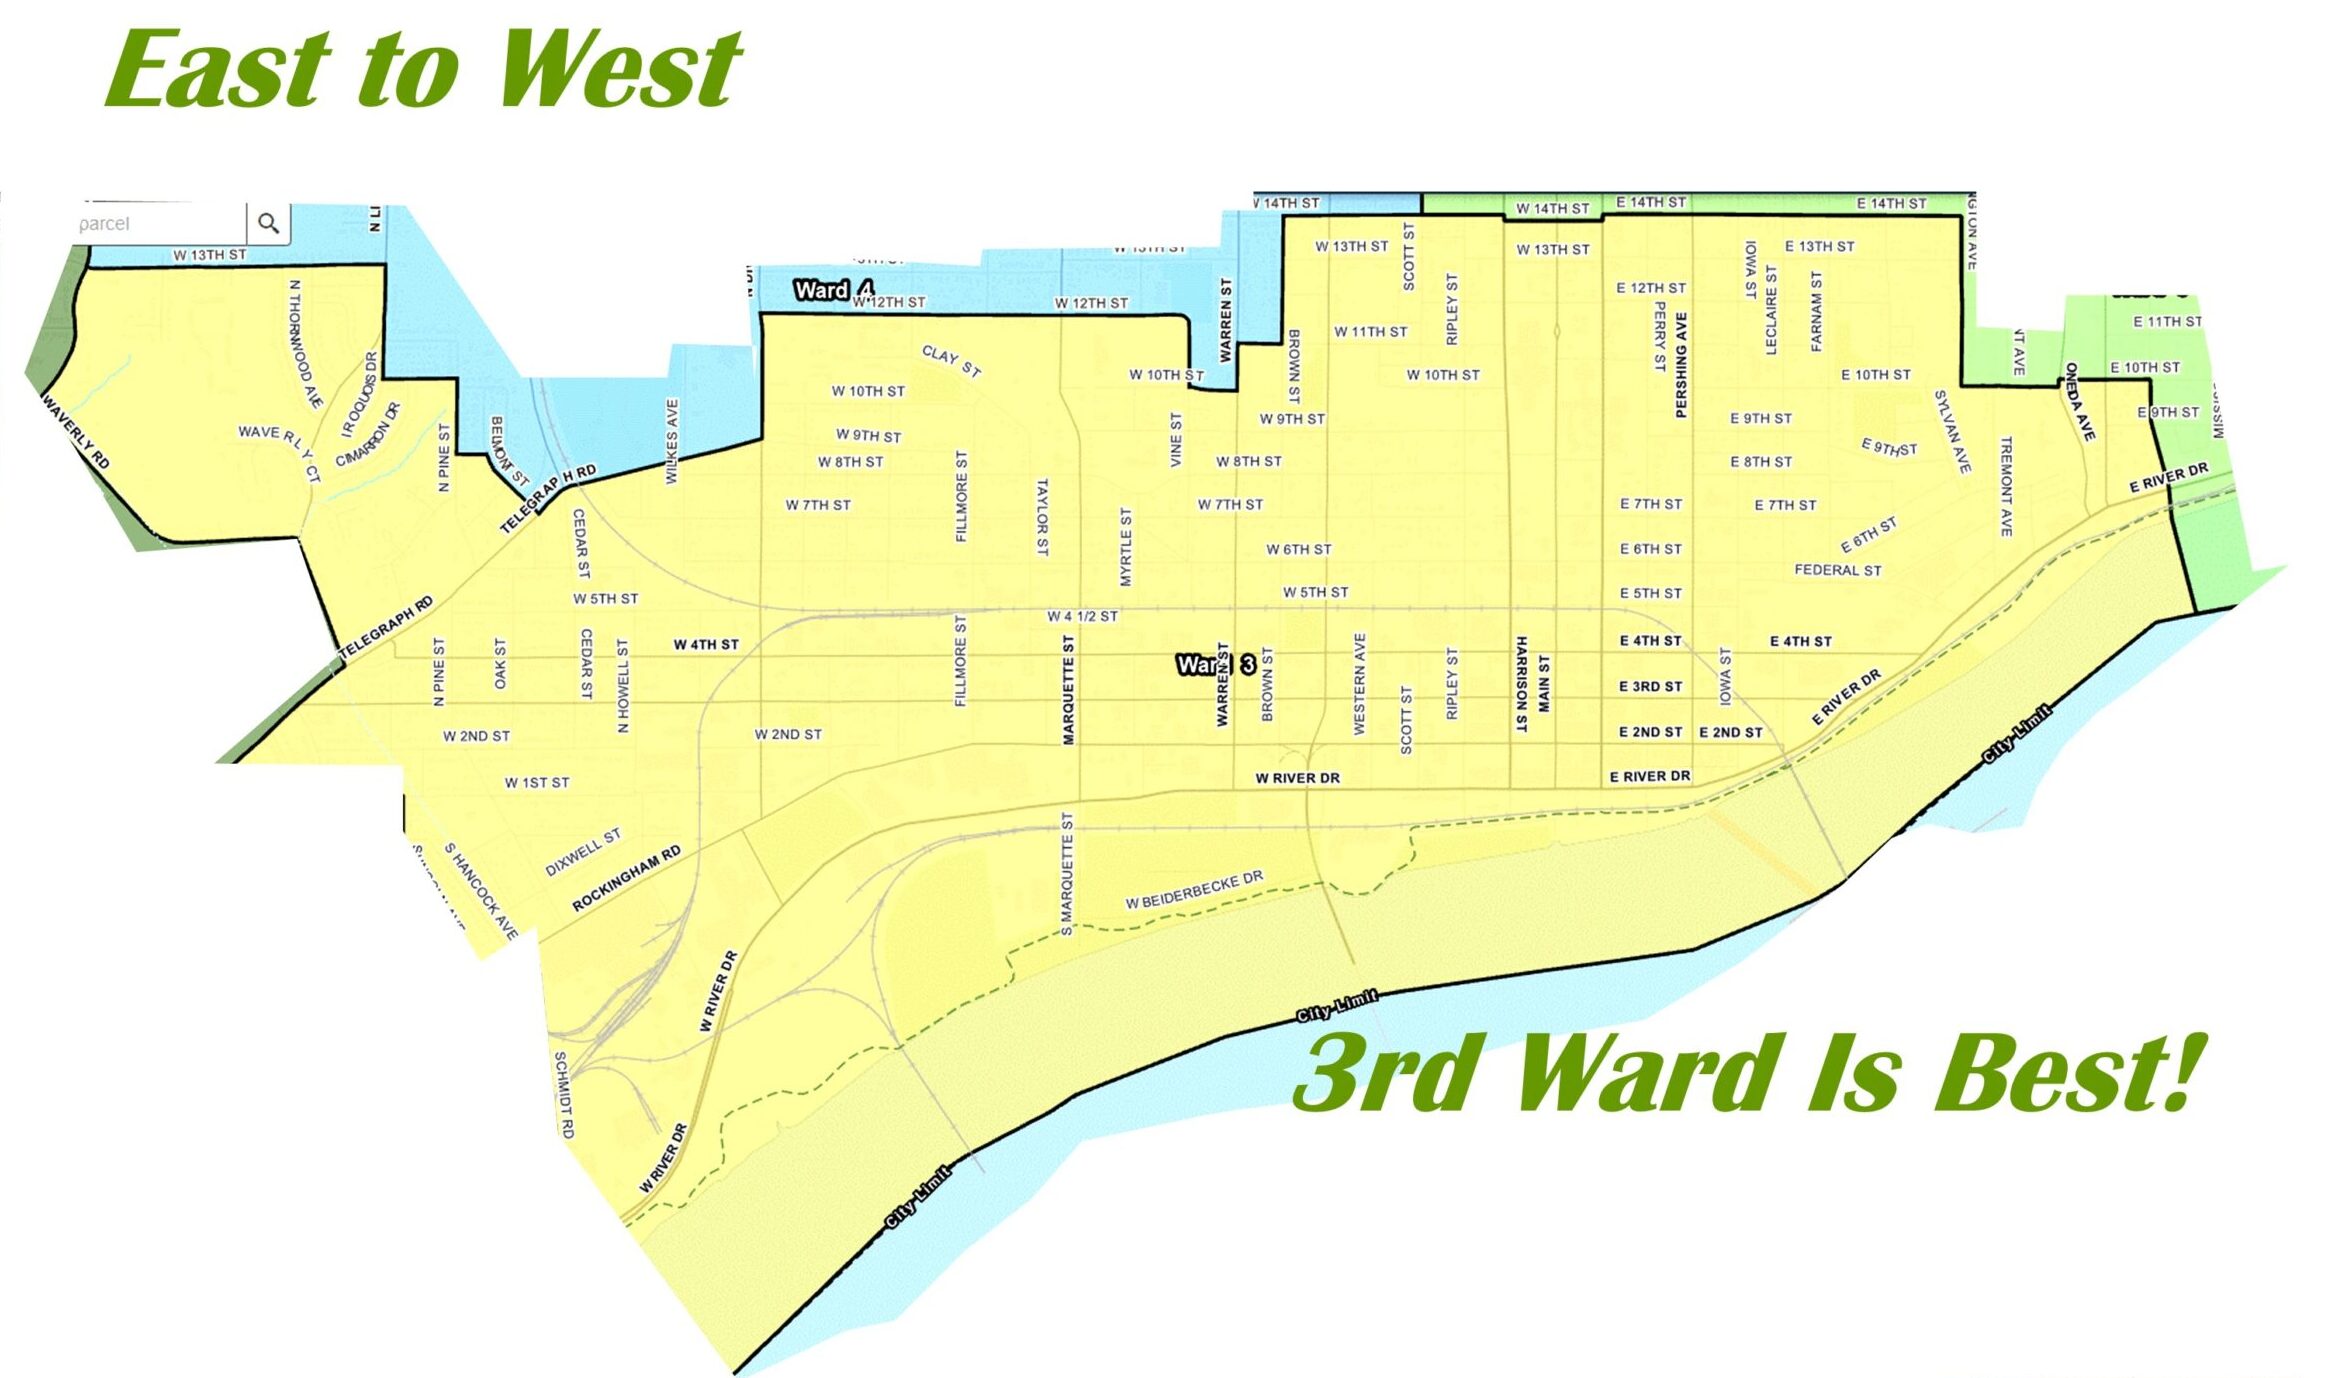 East to West, 3rd Ward is BEST!